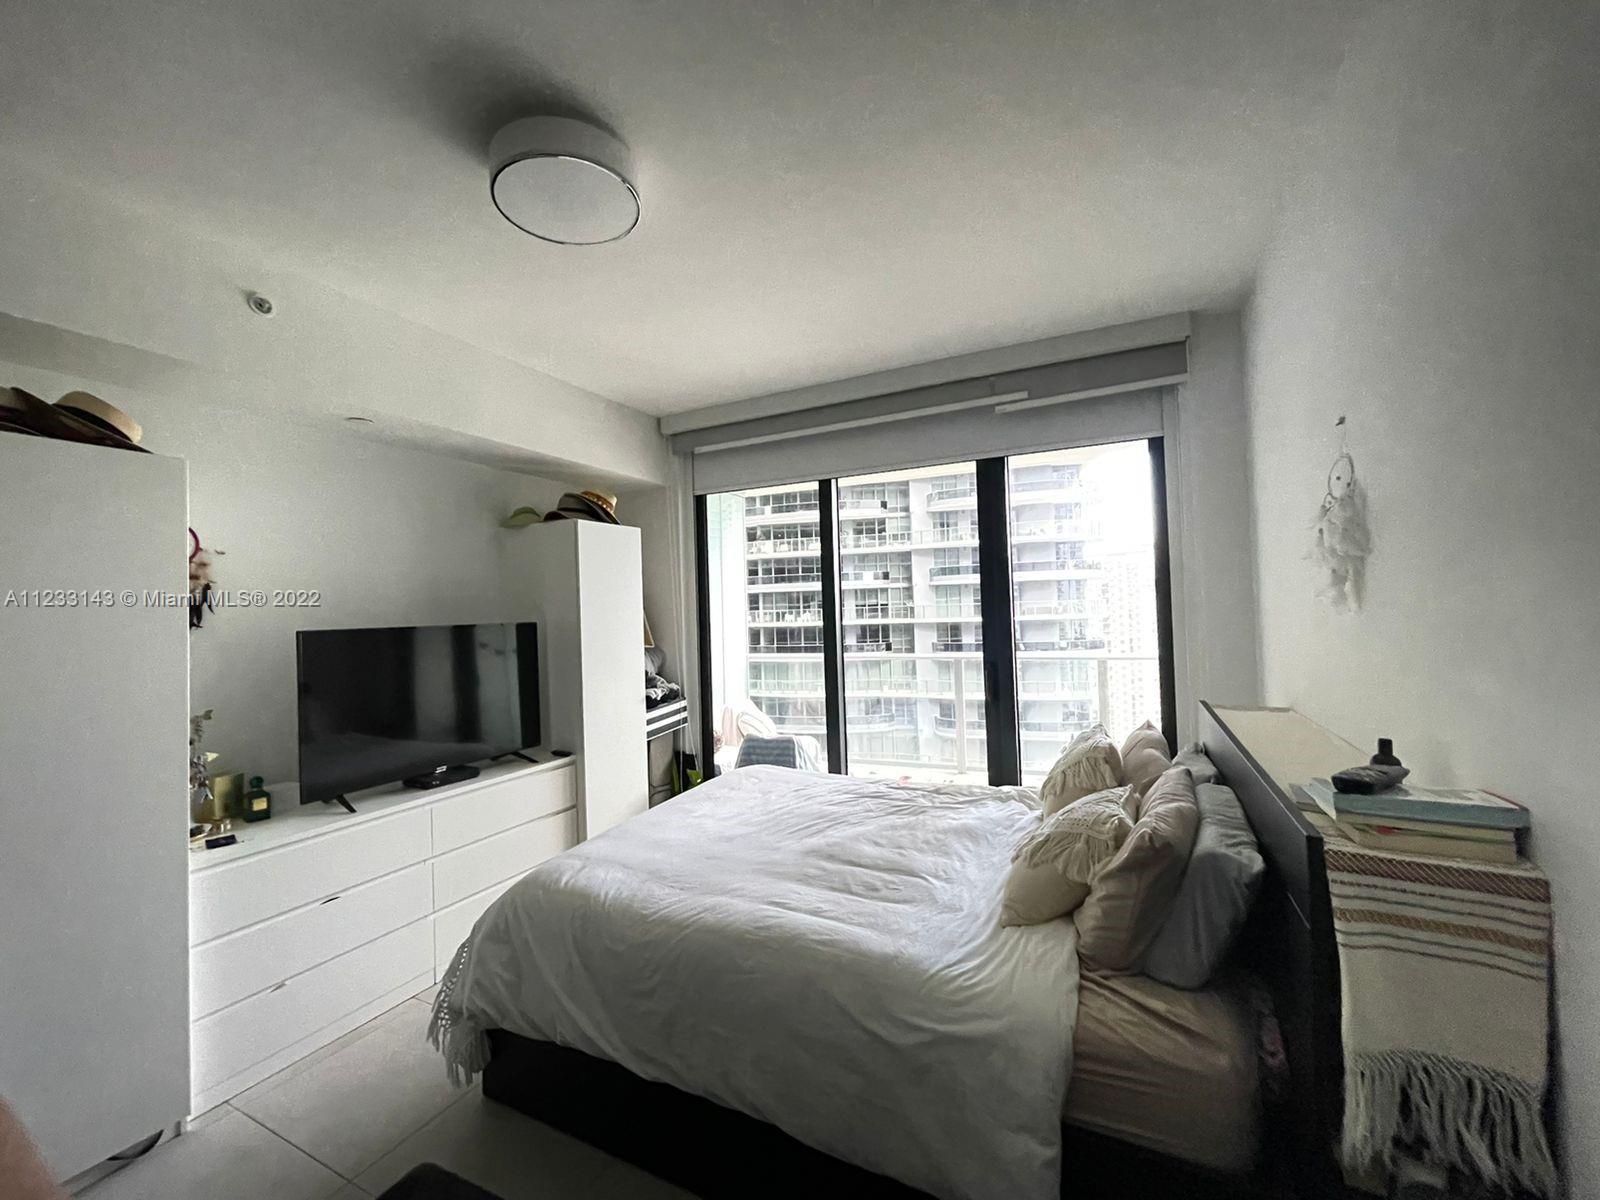 BEAUTIFUL STUDIO FOR RENT, BEST  BUILDING IN BRICKELL WITH THE BEST AMENITIES, DON'T MISS THIS OPPORTUNITY TO LIVE HERE. MIN. 24H FOR SHOWING. AVAILABLE 9.3.22. ONE-YEAR LEASE.